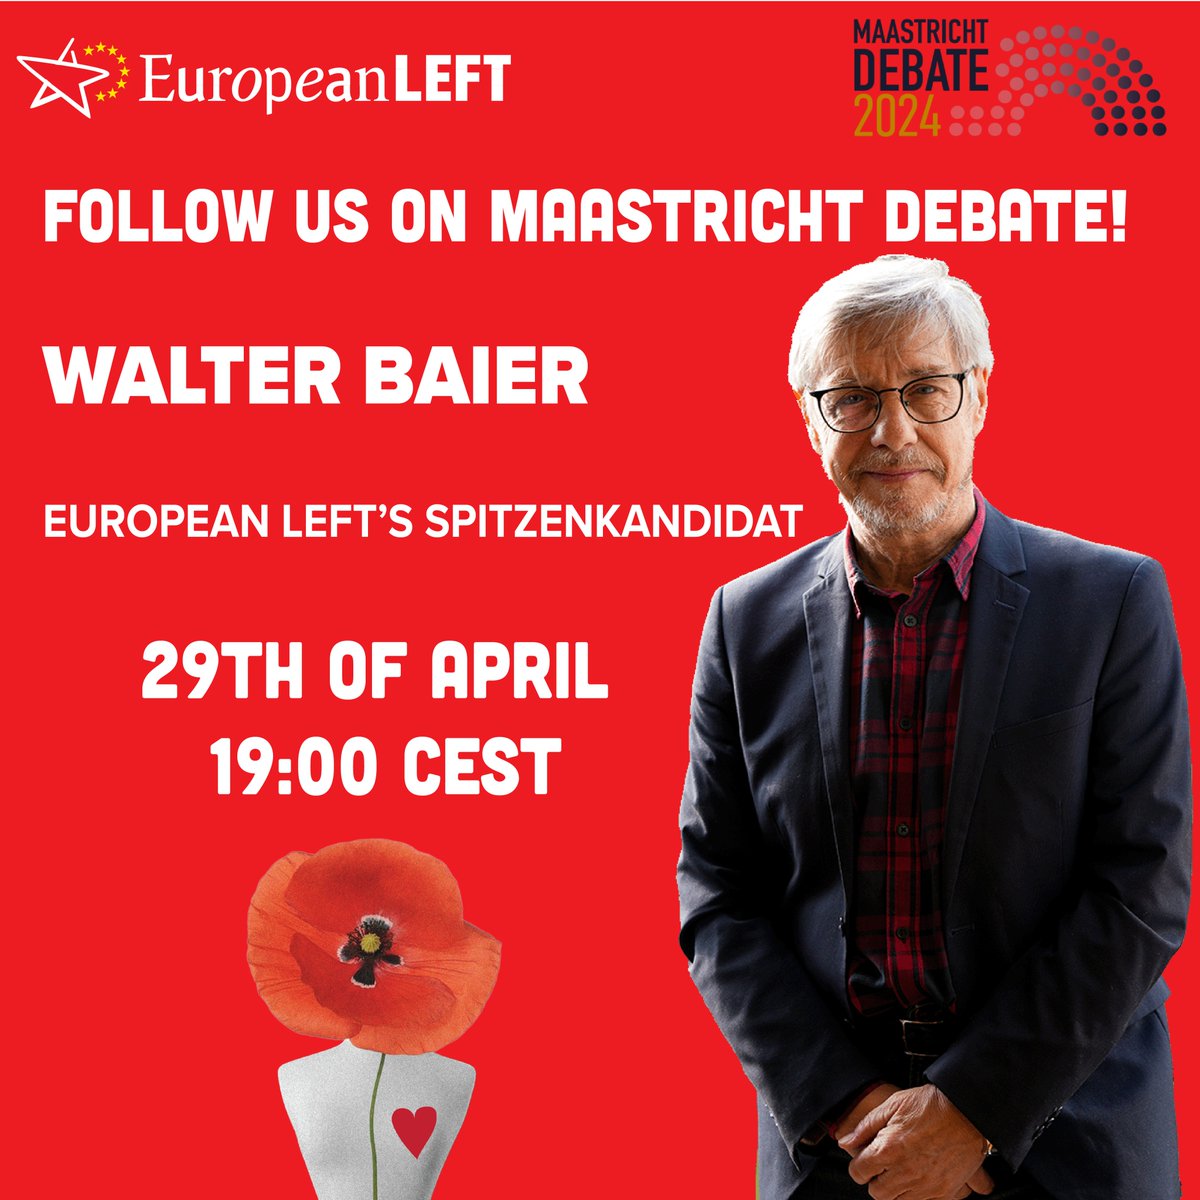 FOLLOW US ON #MaastrichtDebate ON MONDAY 29th at 19:00 (CEST)! @WalterBaierEL, president and spitzenkandidat of the @europeanleft , will take part in the 2024 Maastricht Debate, hosted by @_StudioEuropa and @POLITICOEurope. All information: maastrichtdebate.eu